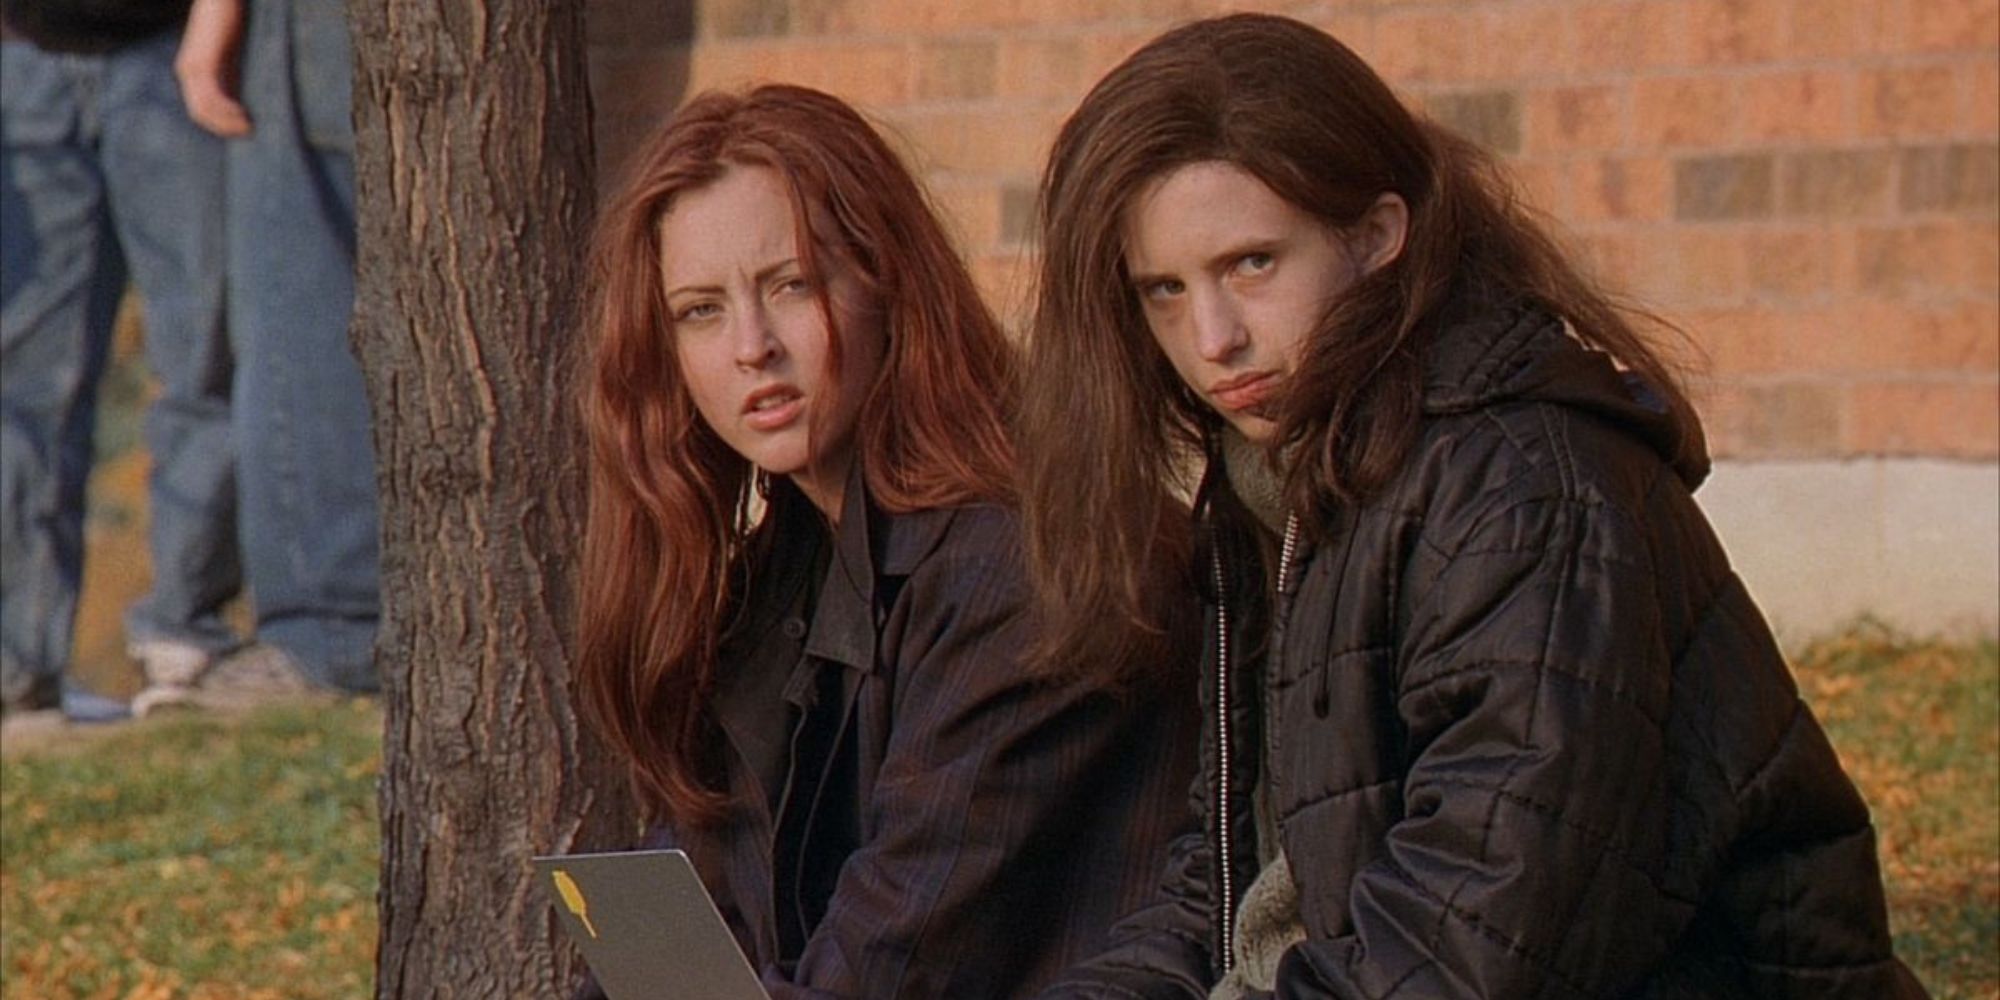 Katherine Isabelle and Emily Perkins as Ginger and Brigitte, a pair of teenage sisters from 'Ginger Snaps'